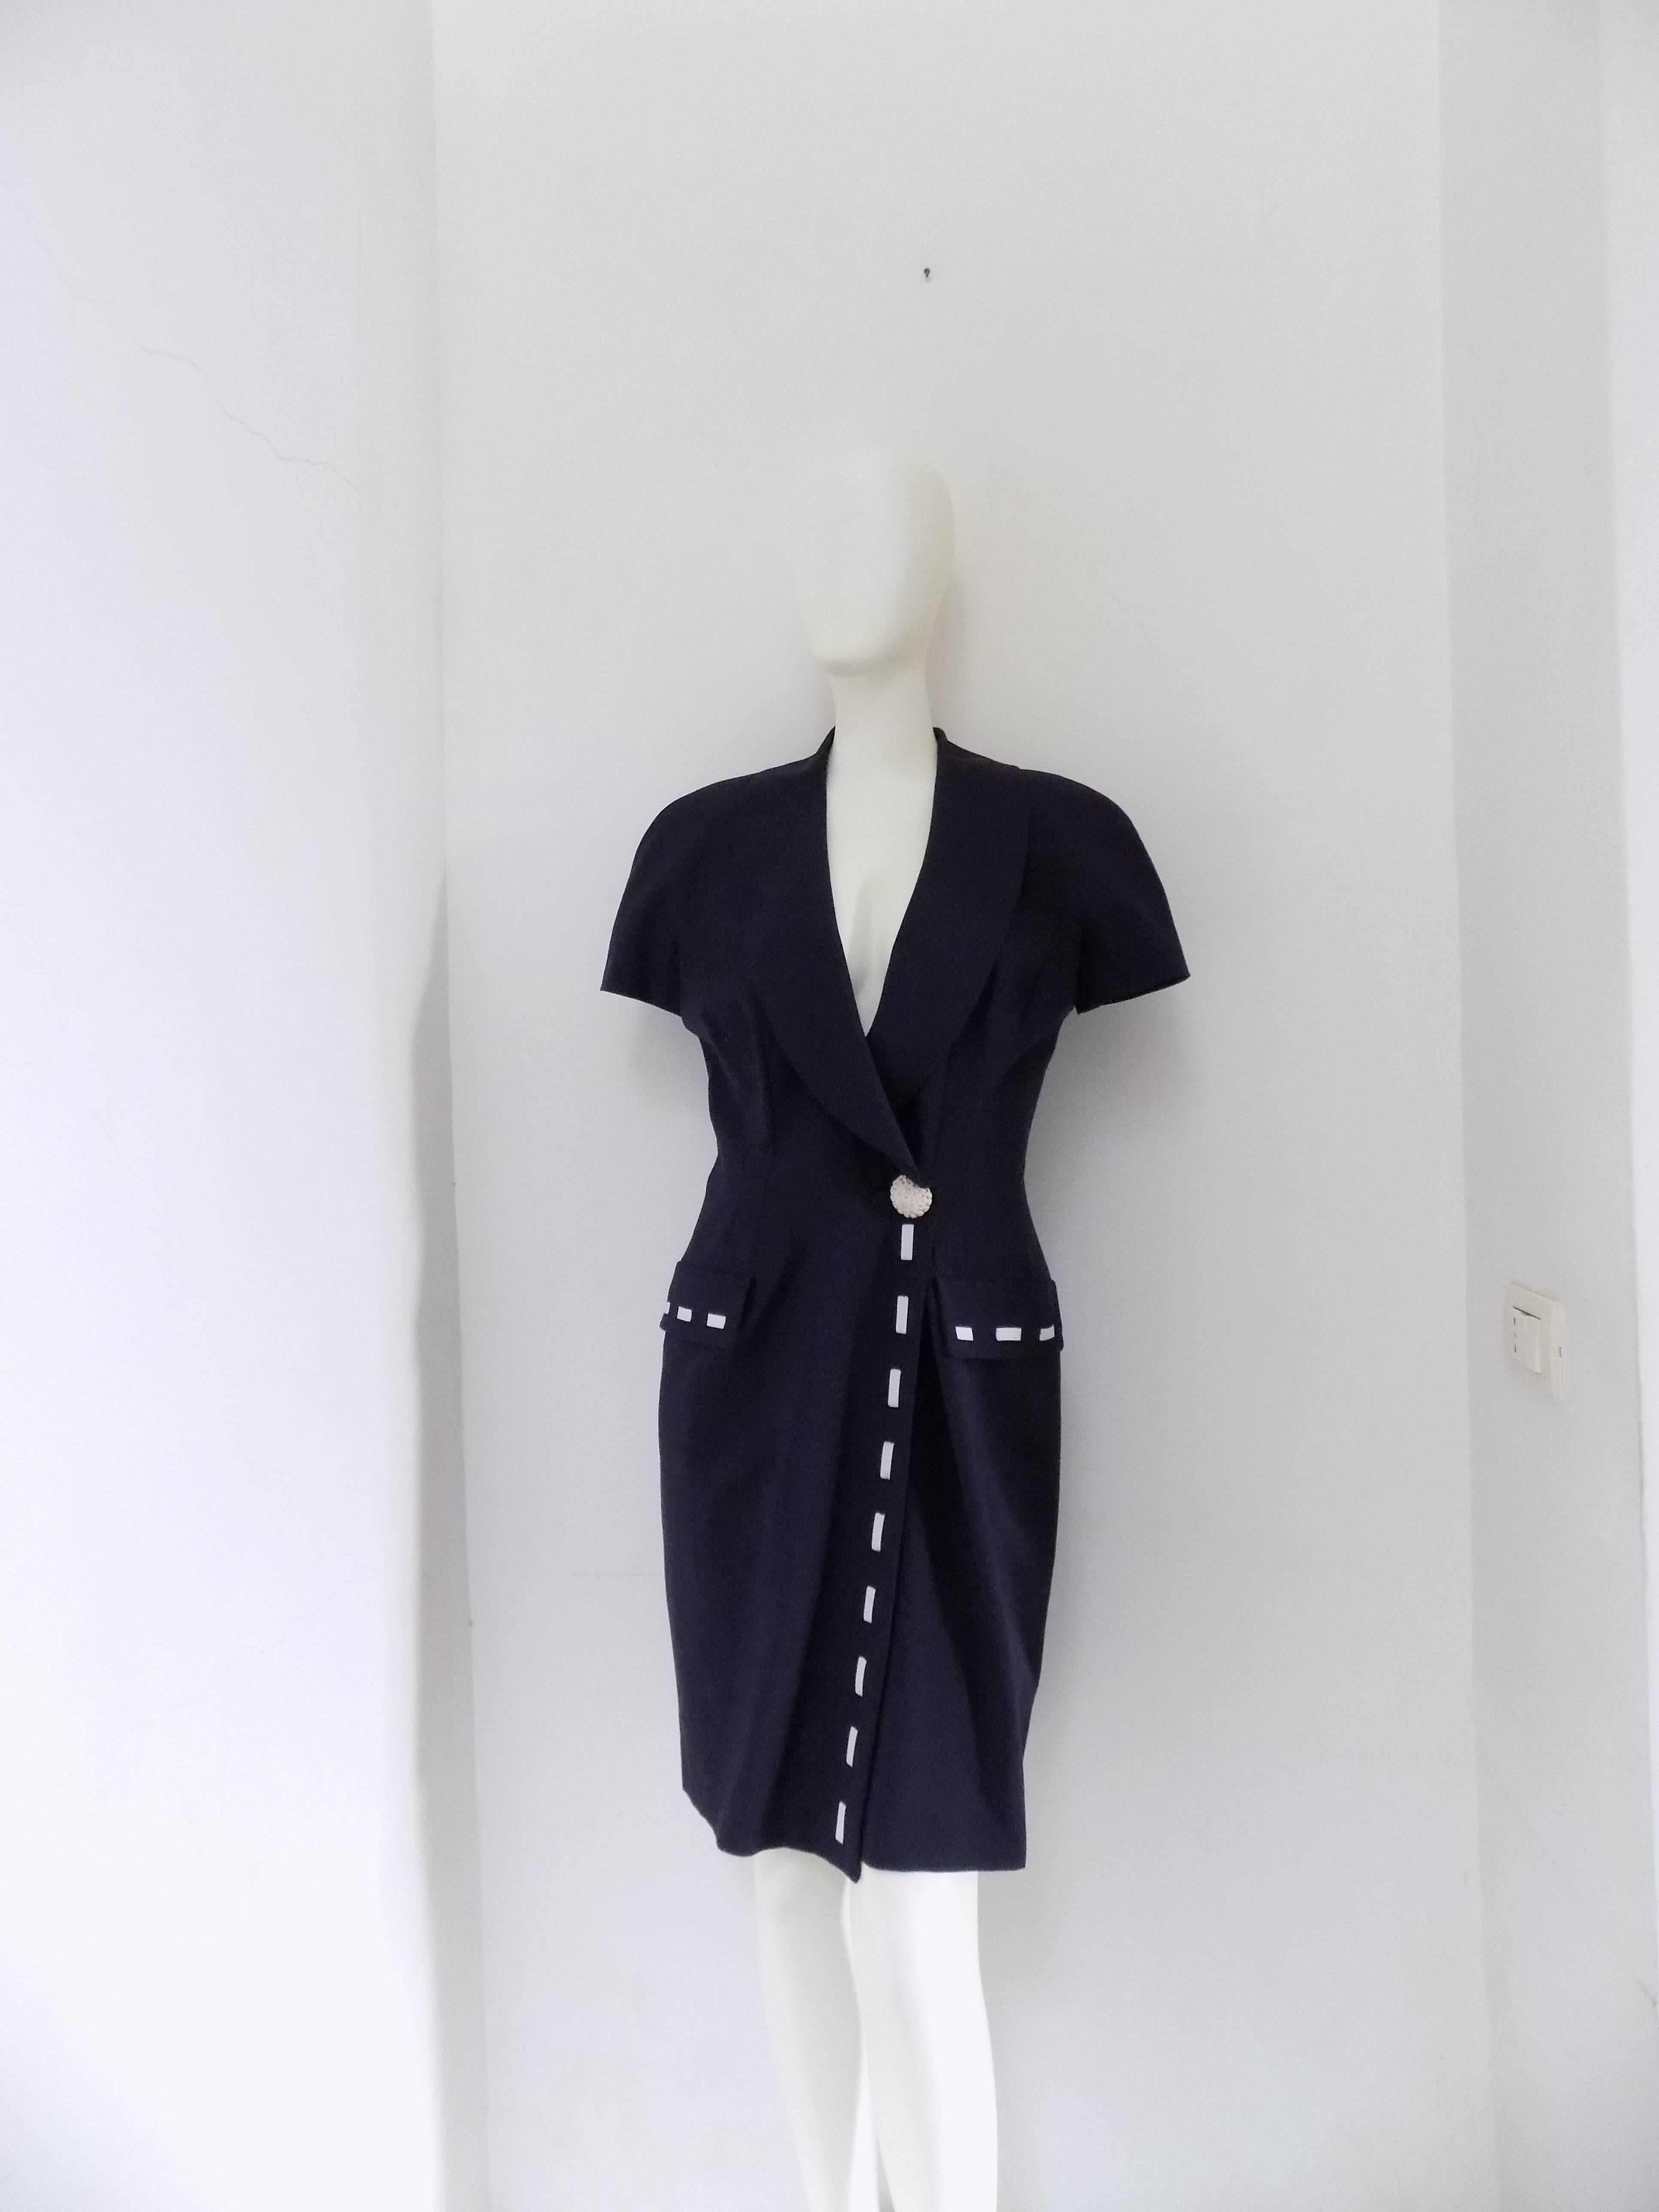 1970s Fendi blu white dress

Totally made in italy in italian size range 46

Standard sizing range L

composition 100 % wool
lining 60 acetate 40 cupro